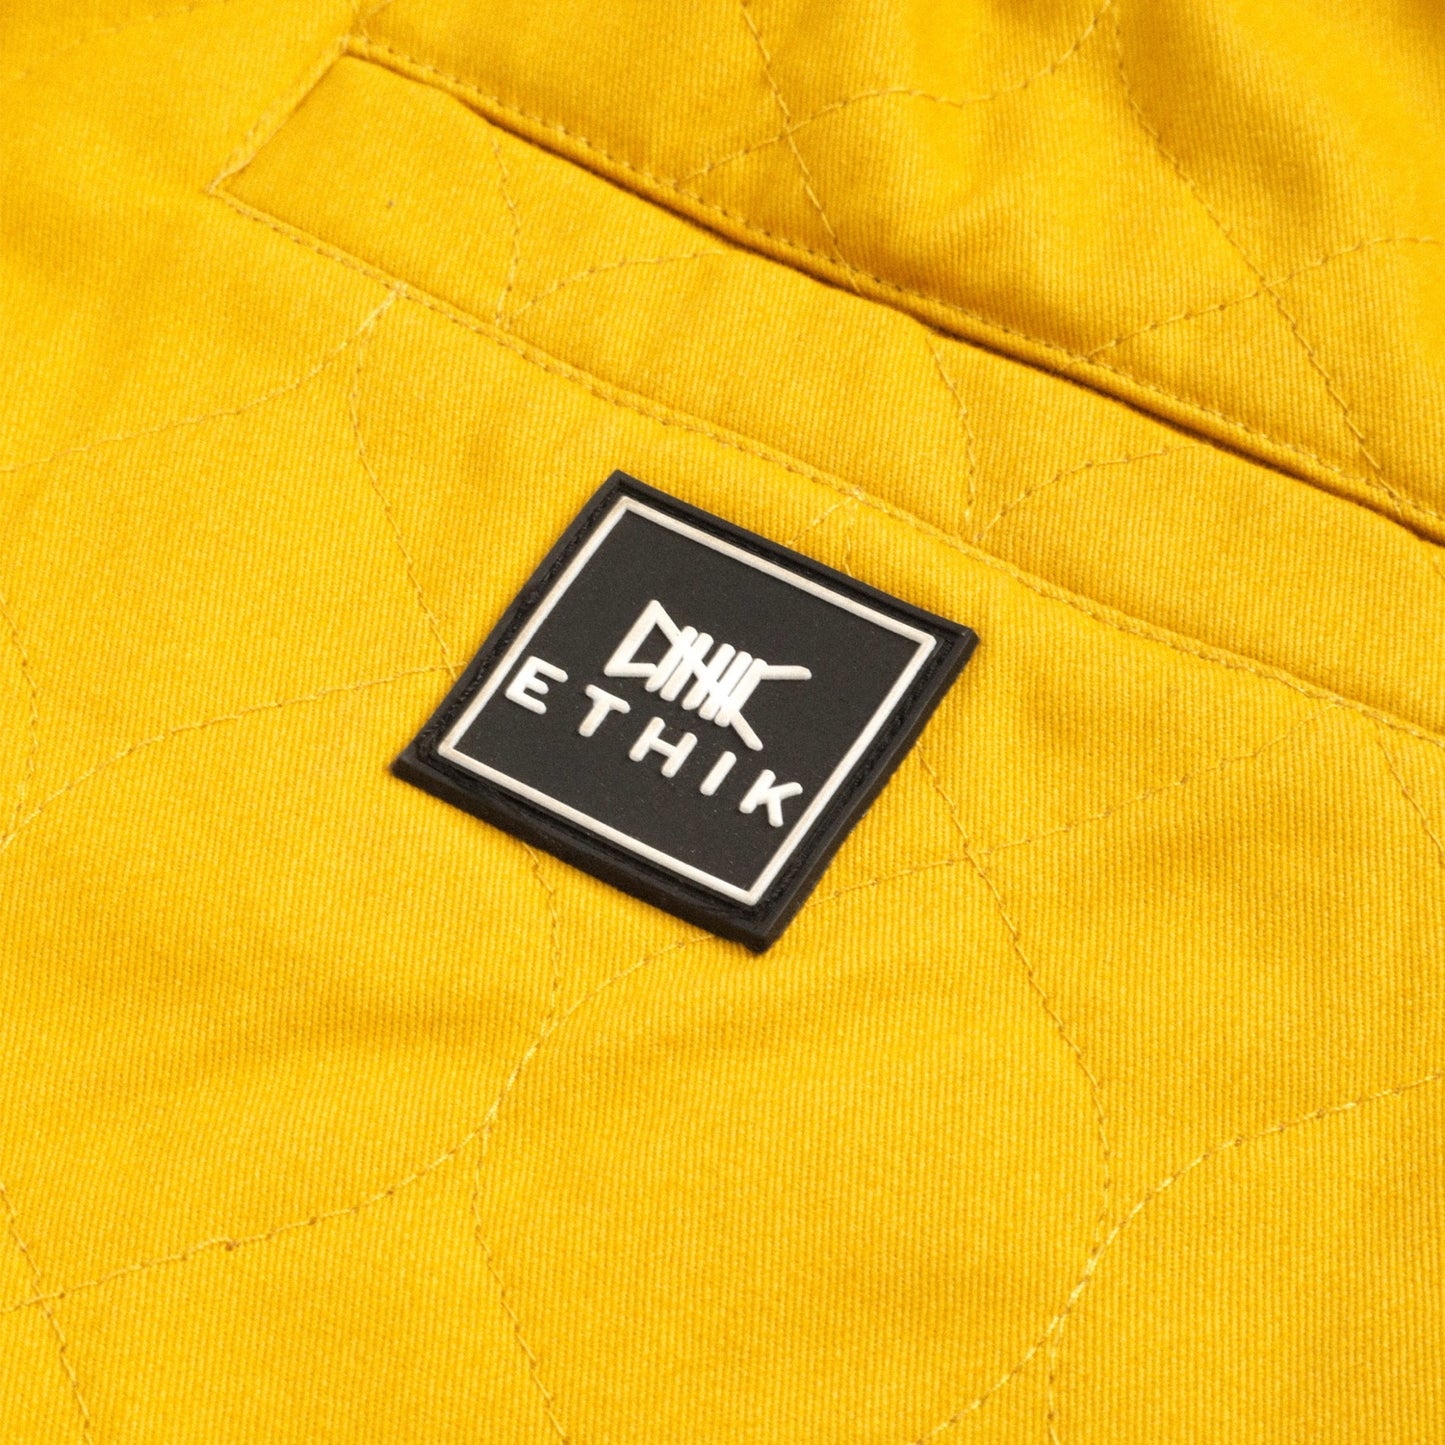 Quilted Joggers | Yellow